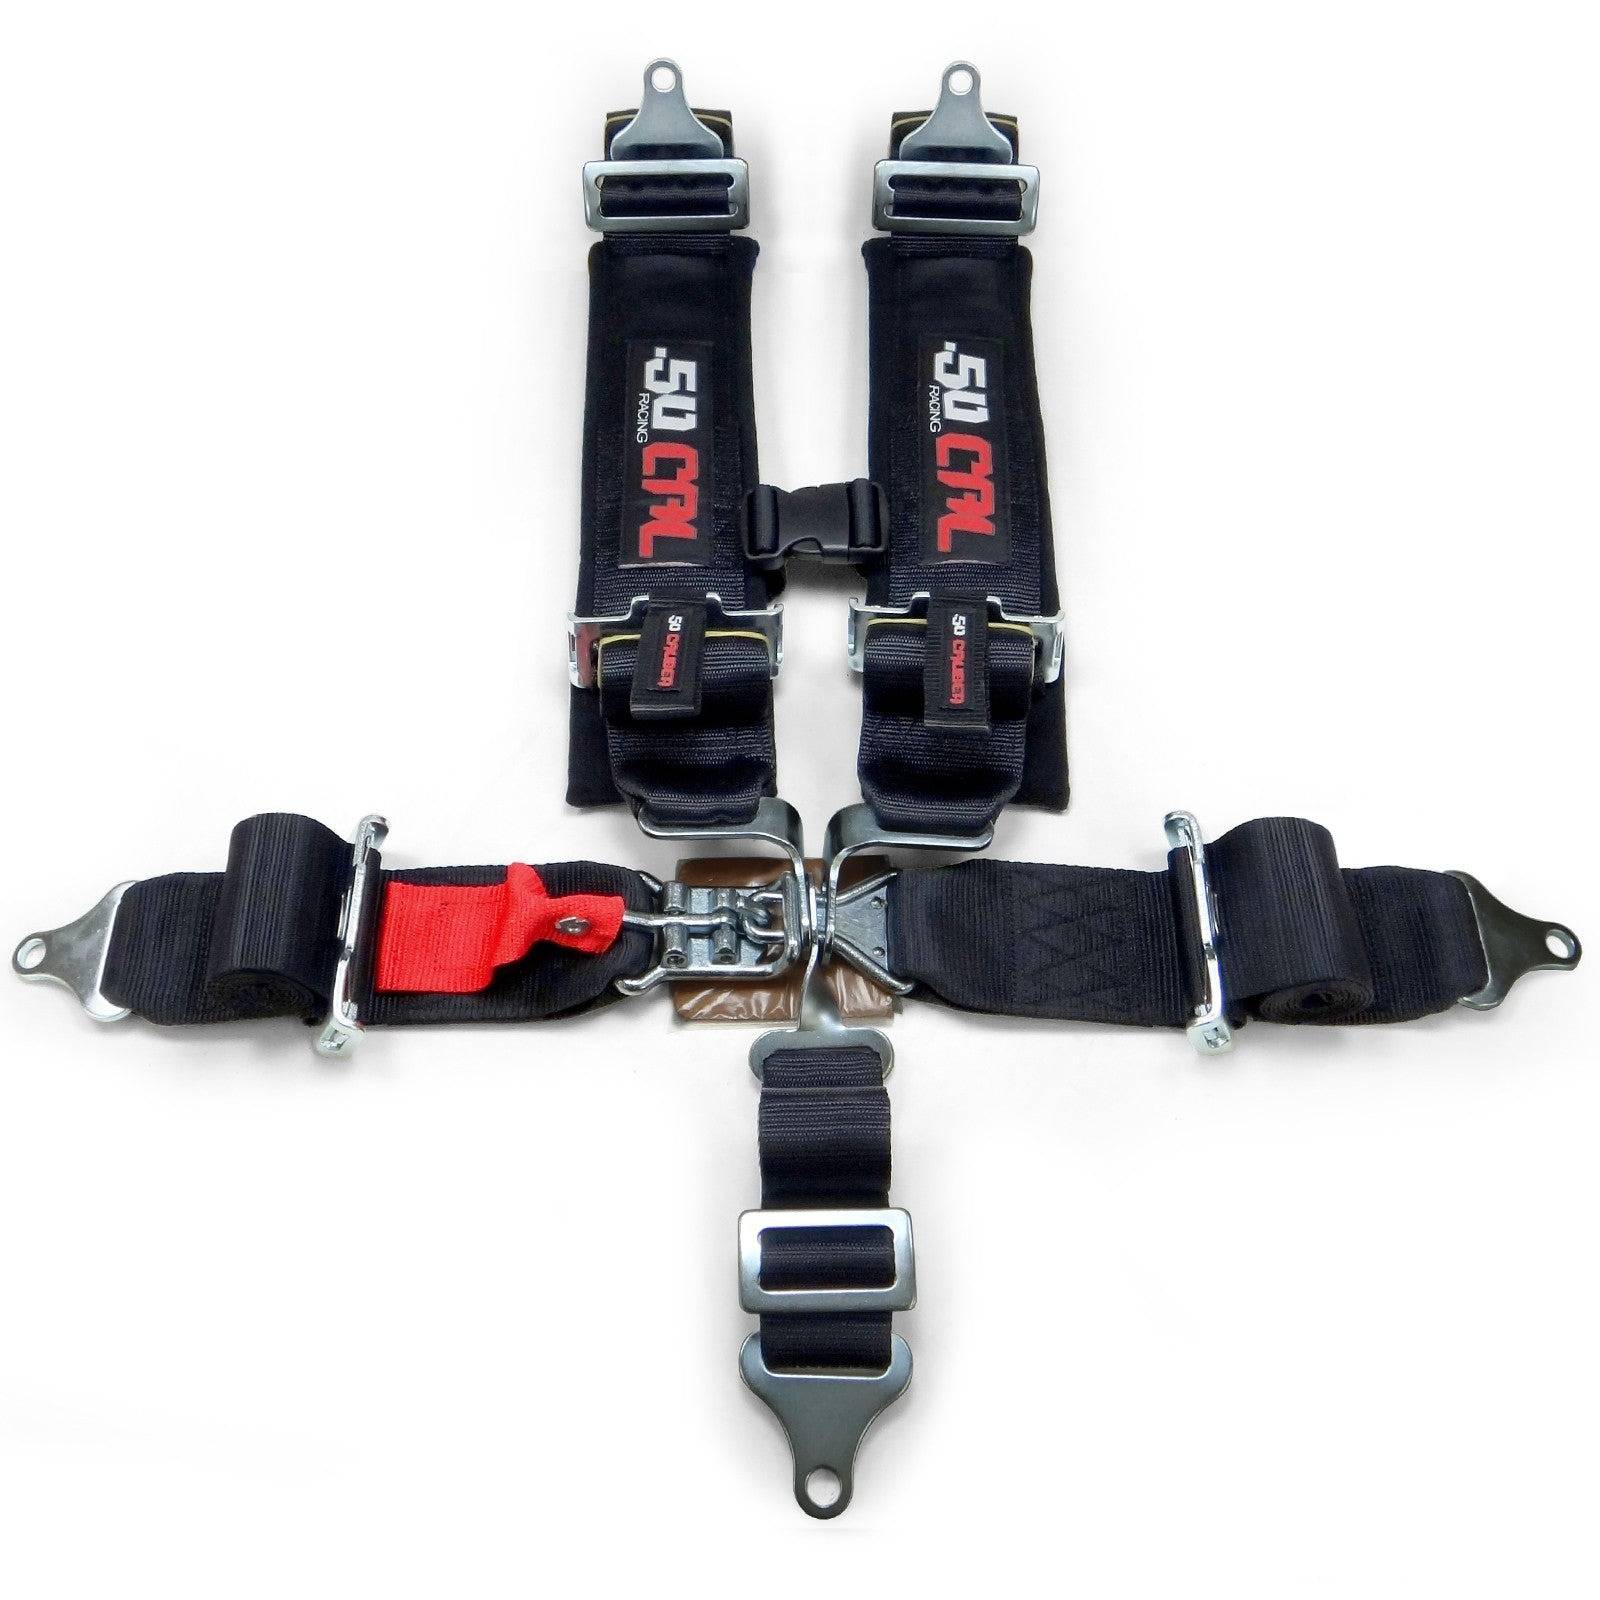 SFI Approved 3" 5-Point Safety Harness Seat Belt 50 Caliber Racing